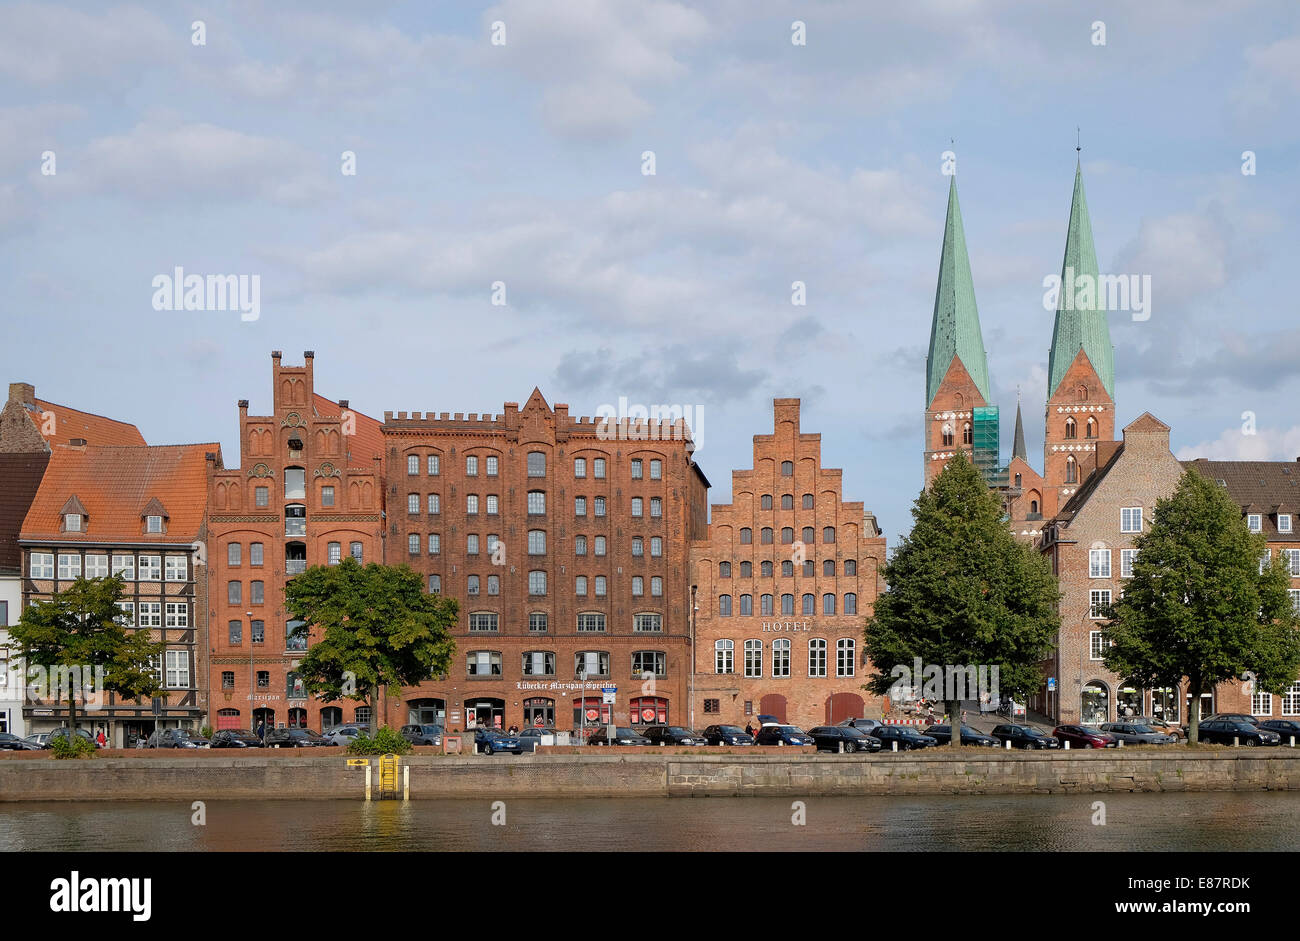 Historic centre with the Marzipan-Speicher warehouse on Untertrave or Trave River, Lübeck, Schleswig-Holstein, Germany Stock Photo